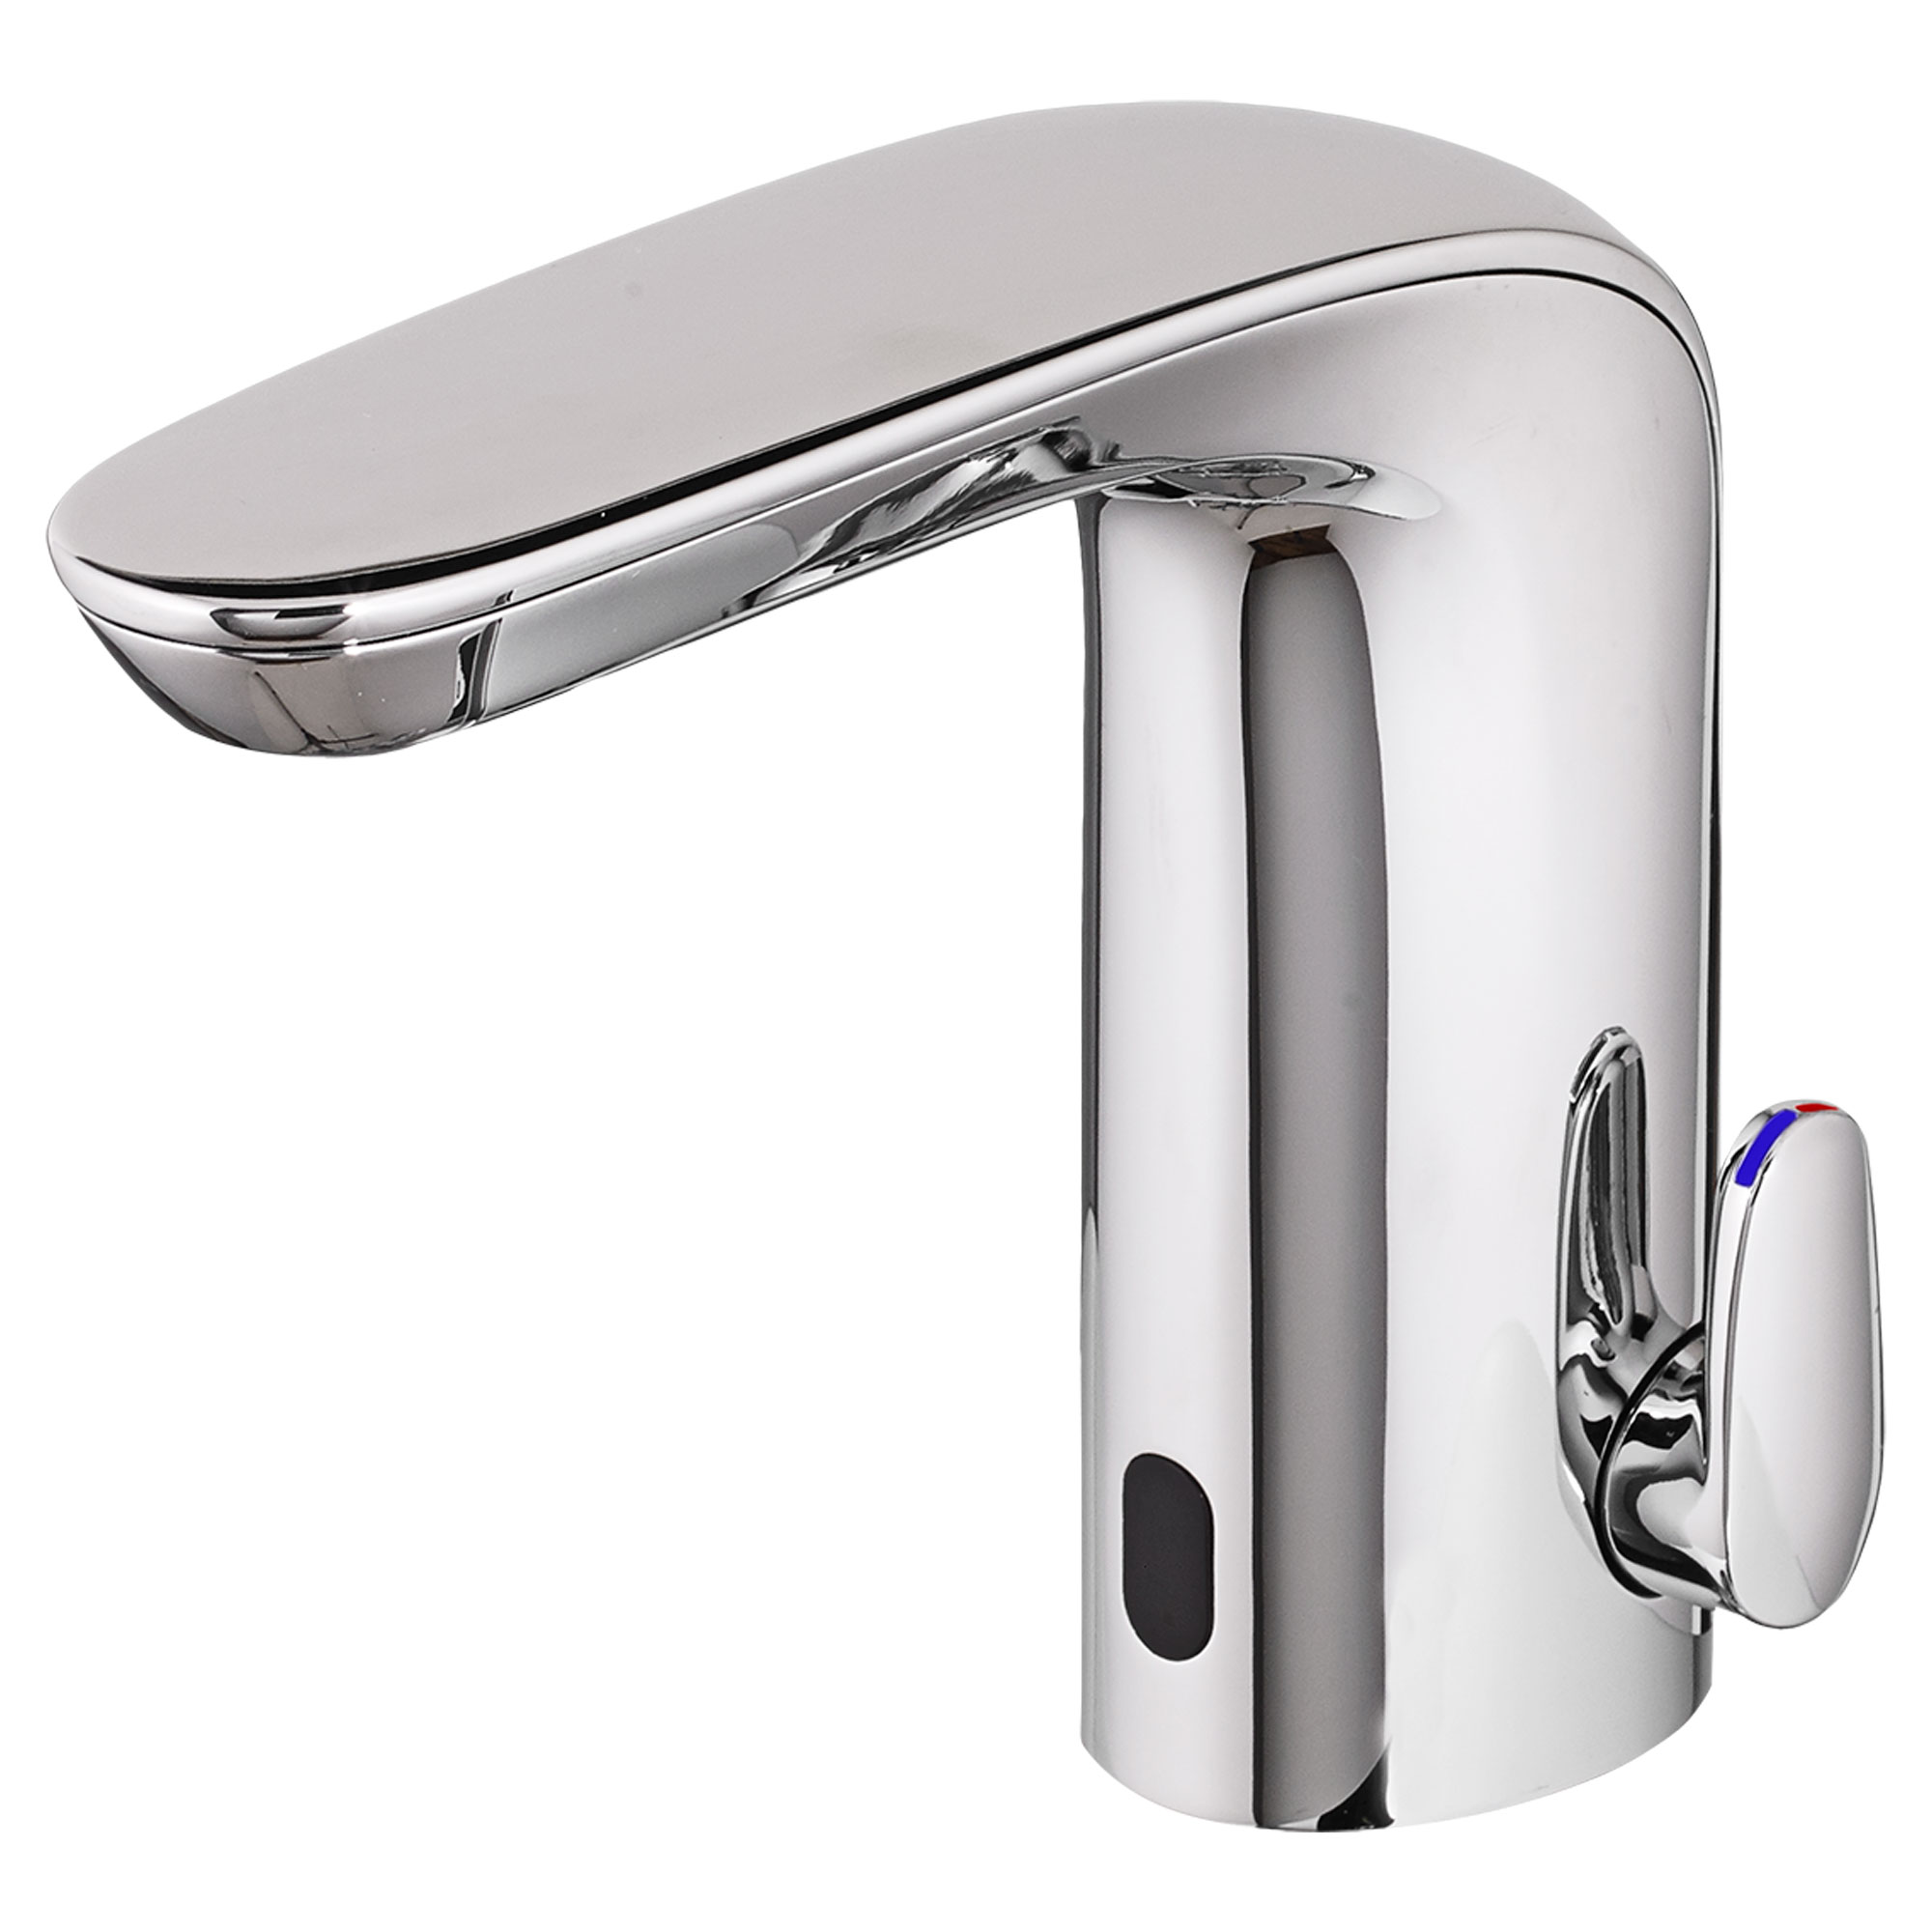 NextGen Selectronic® Touchless Faucet, Battery-Powered With Above 